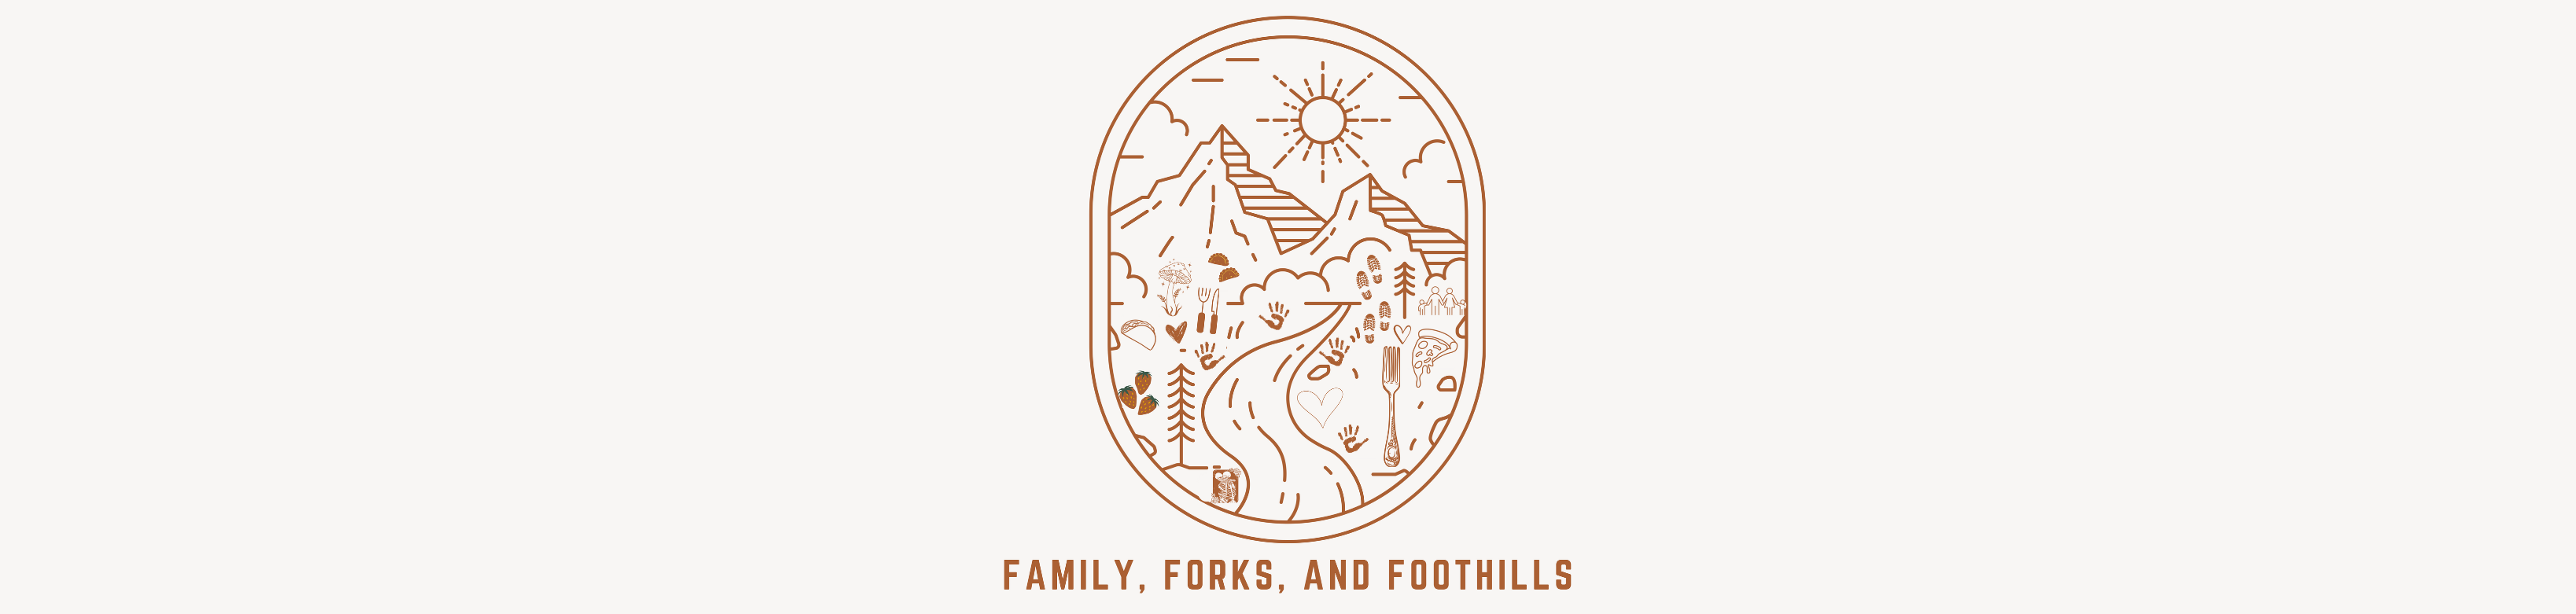 Family, Forks, and Foothills